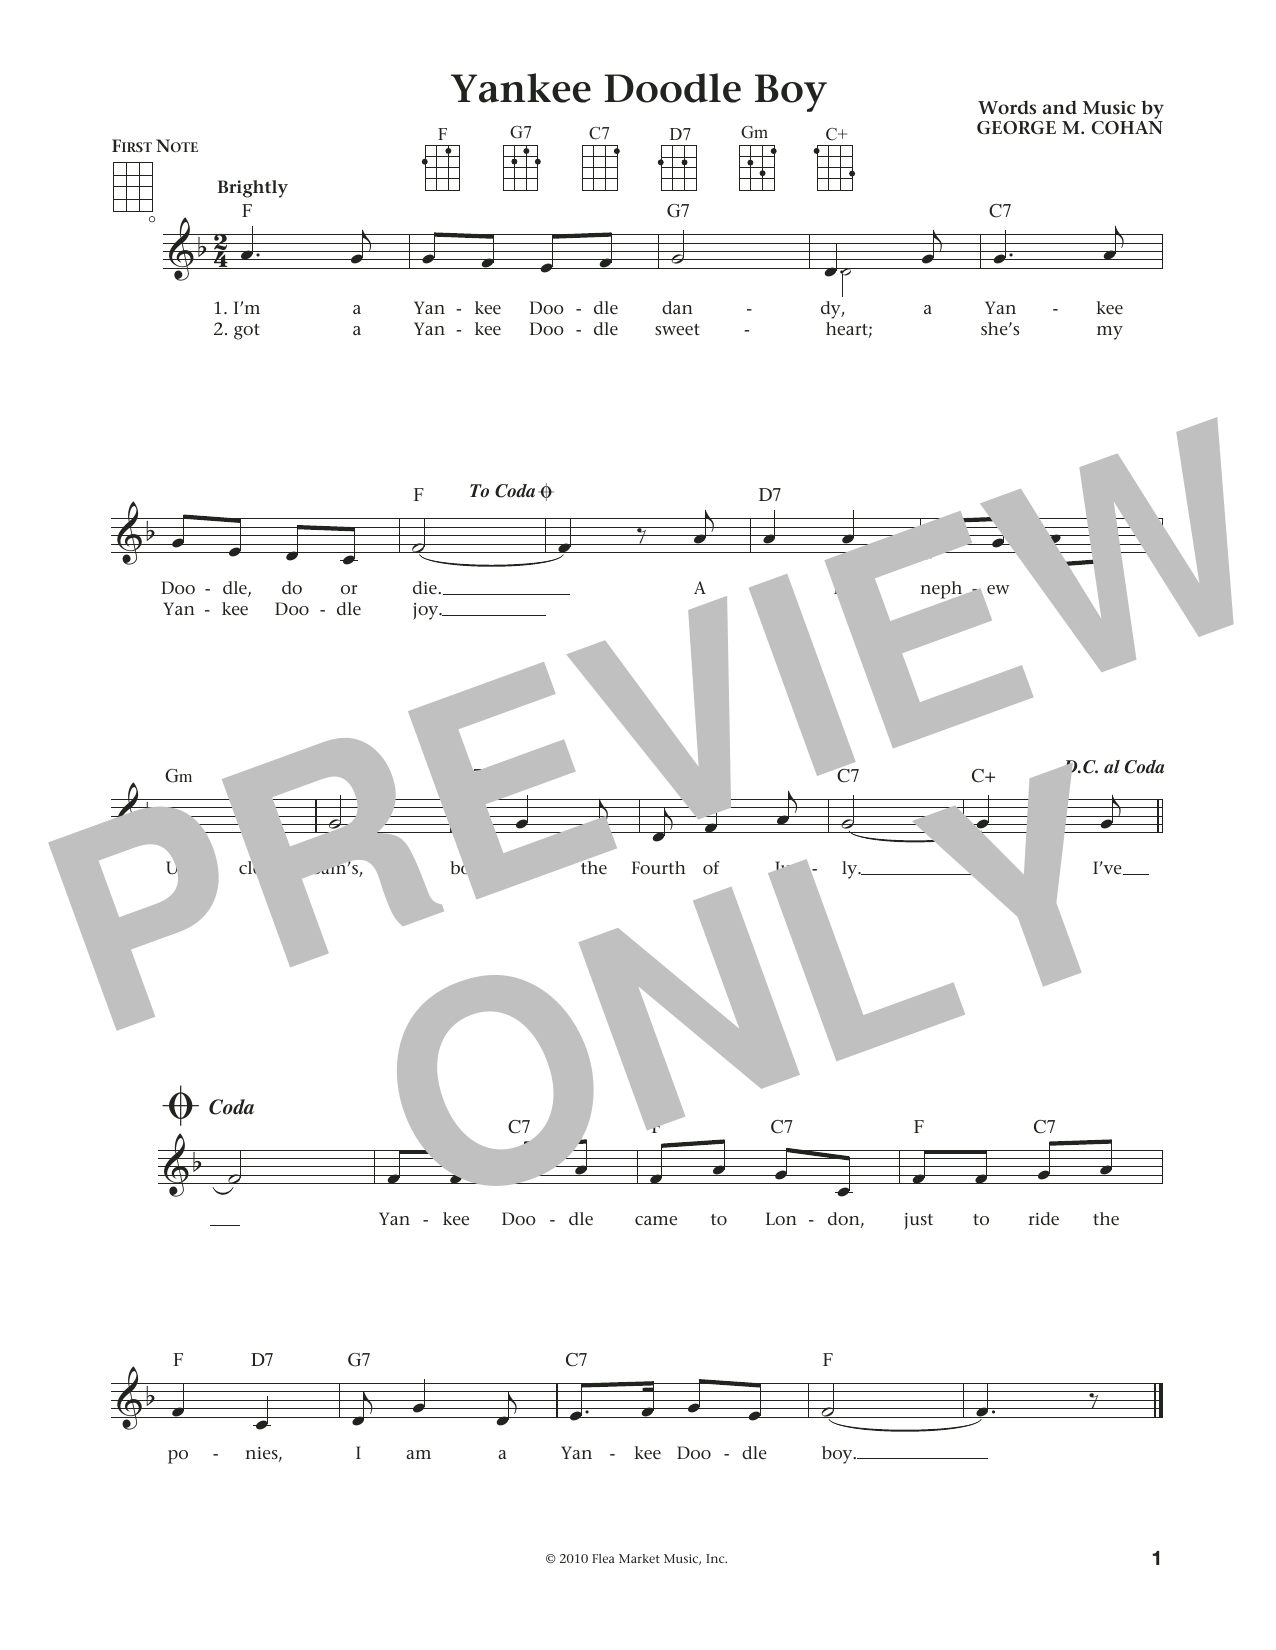 Download George M. Cohan Yankee Doodle Boy (from The Daily Ukule Sheet Music